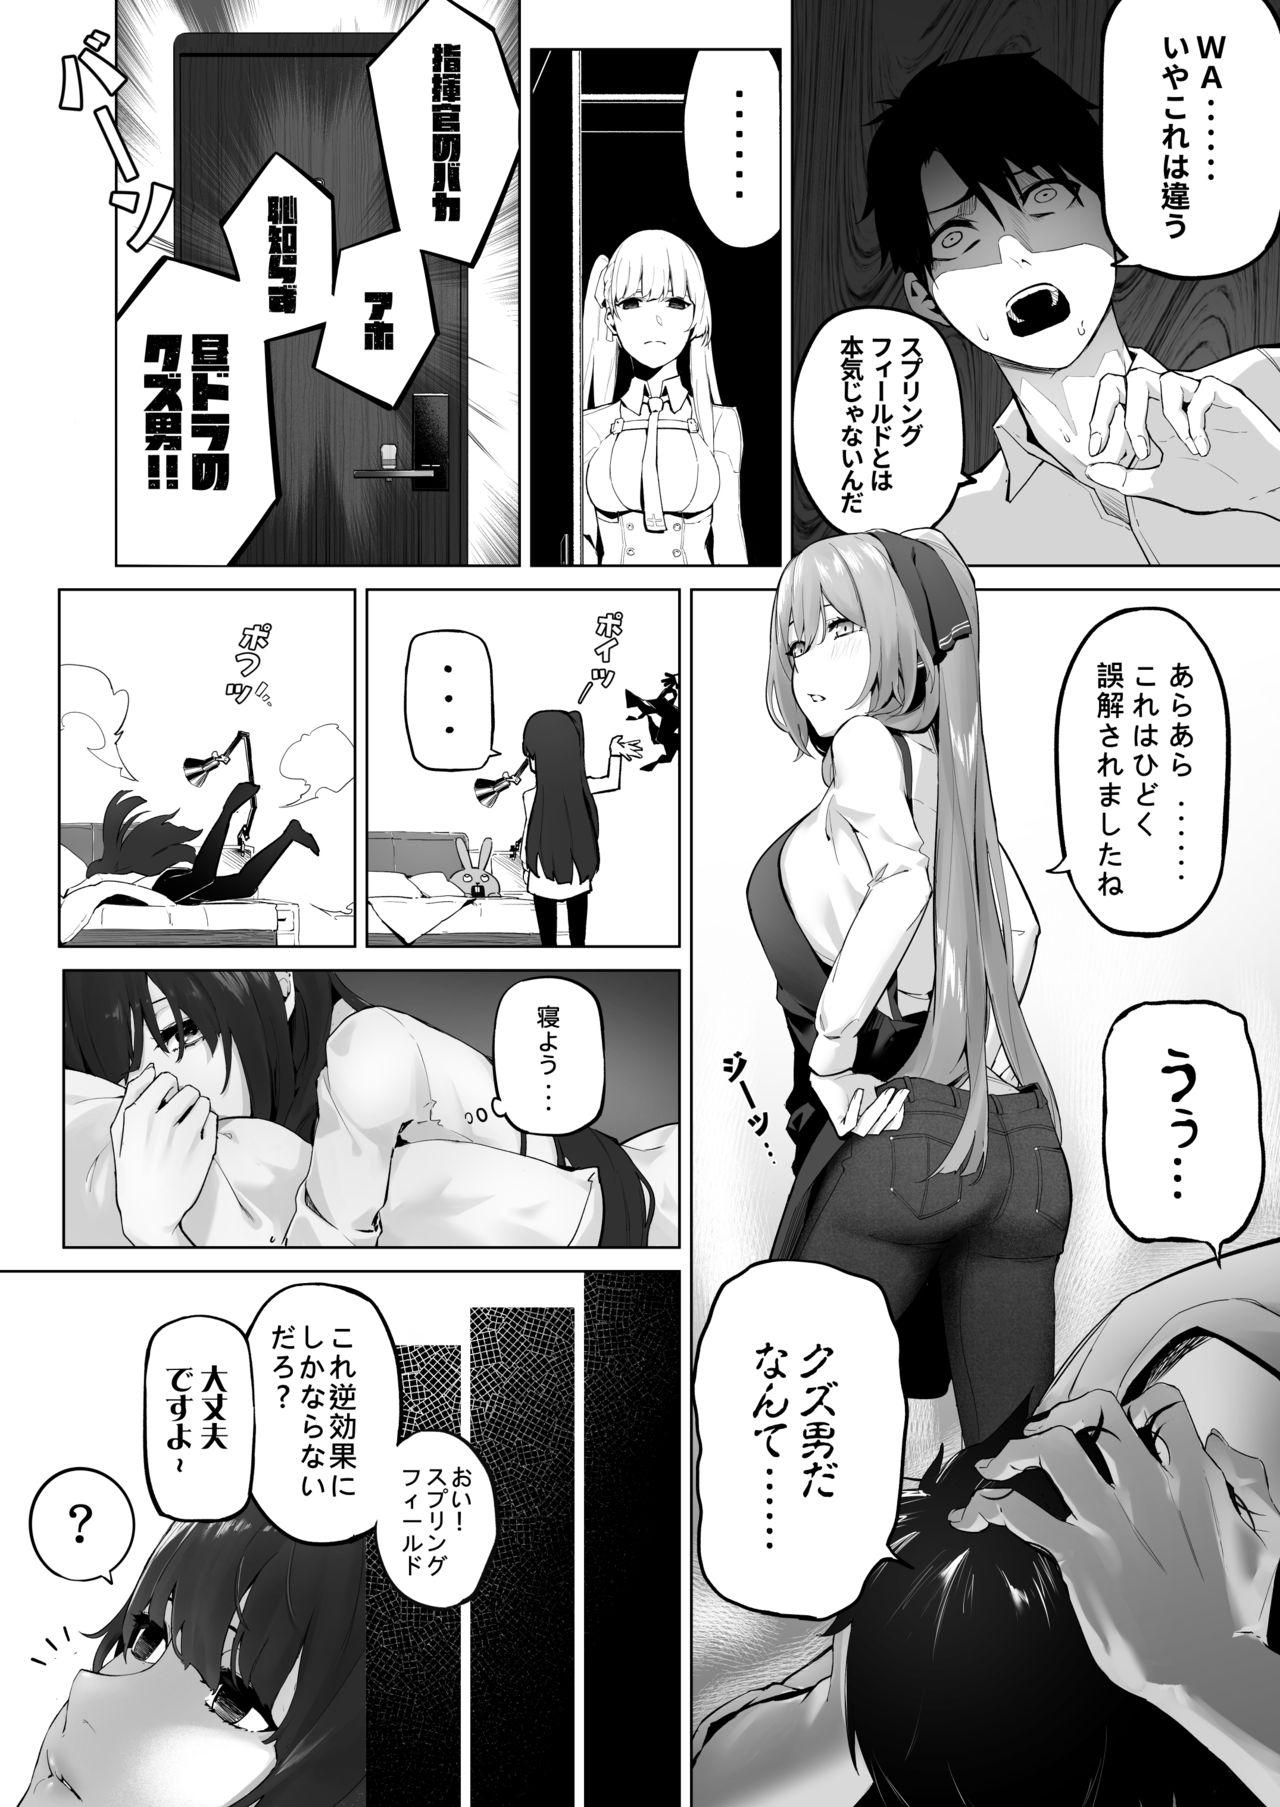 Hardcore Porn Free Field on Fire II - Girls frontline Anal Licking - Page 3